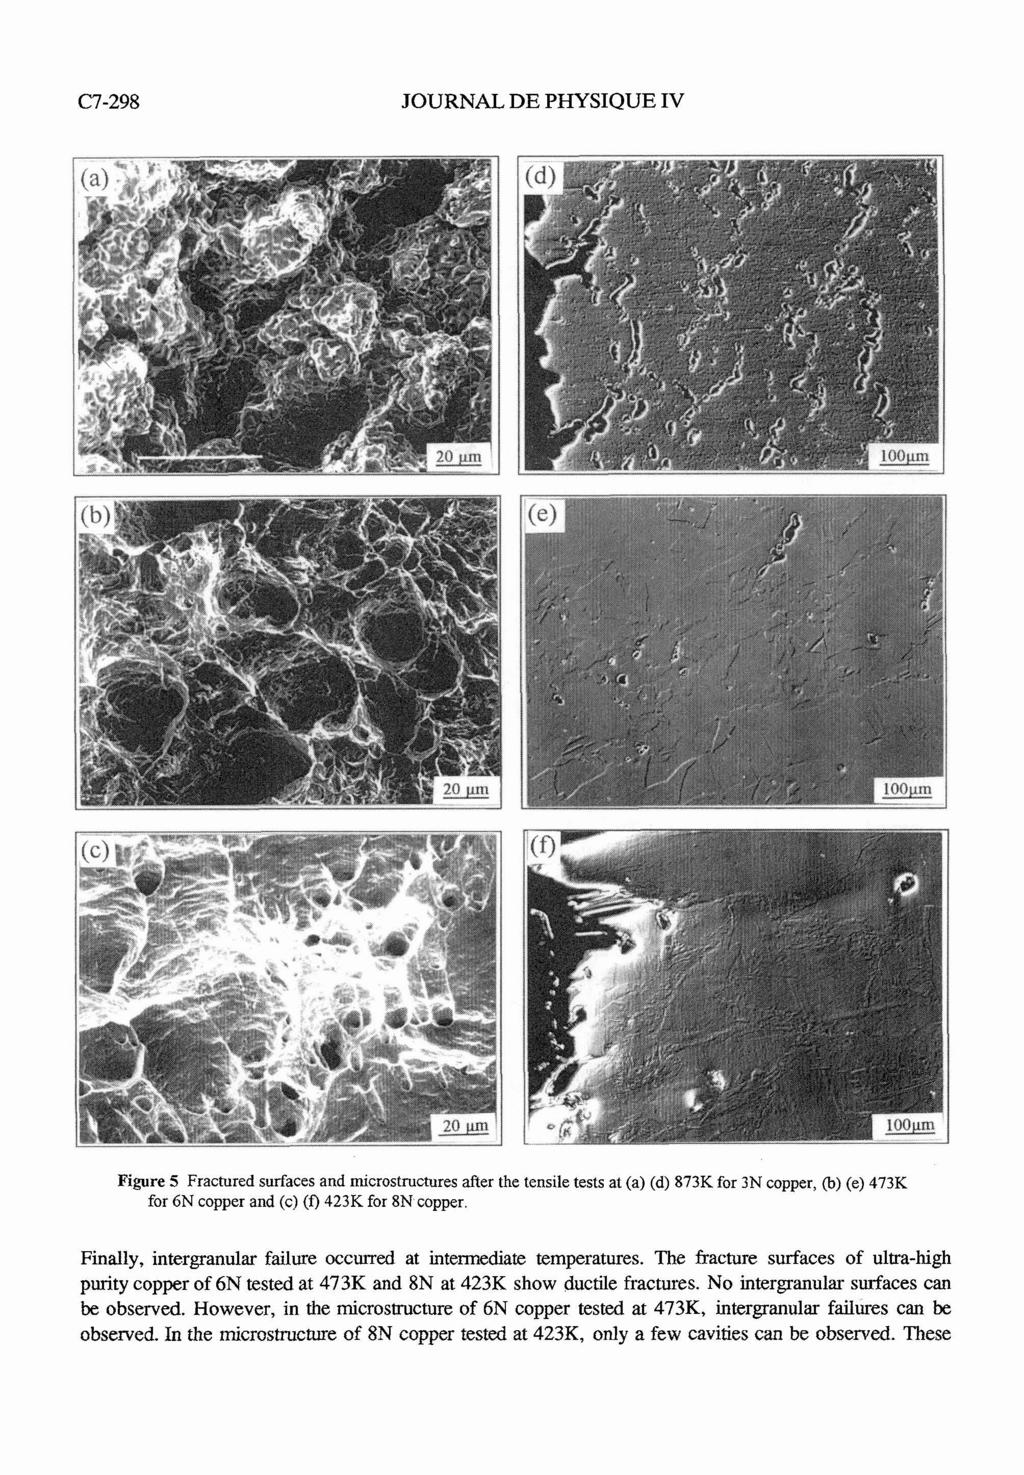 C7-298 JOURNAL DE PHYSIQUE IV Figure 5 Fractured surfaces and microstructures after the tensile tests at (a) (d) 873K for 3N copper, (b) (e) 473K for 6N copper and (c) (0 423K for 8N copper.